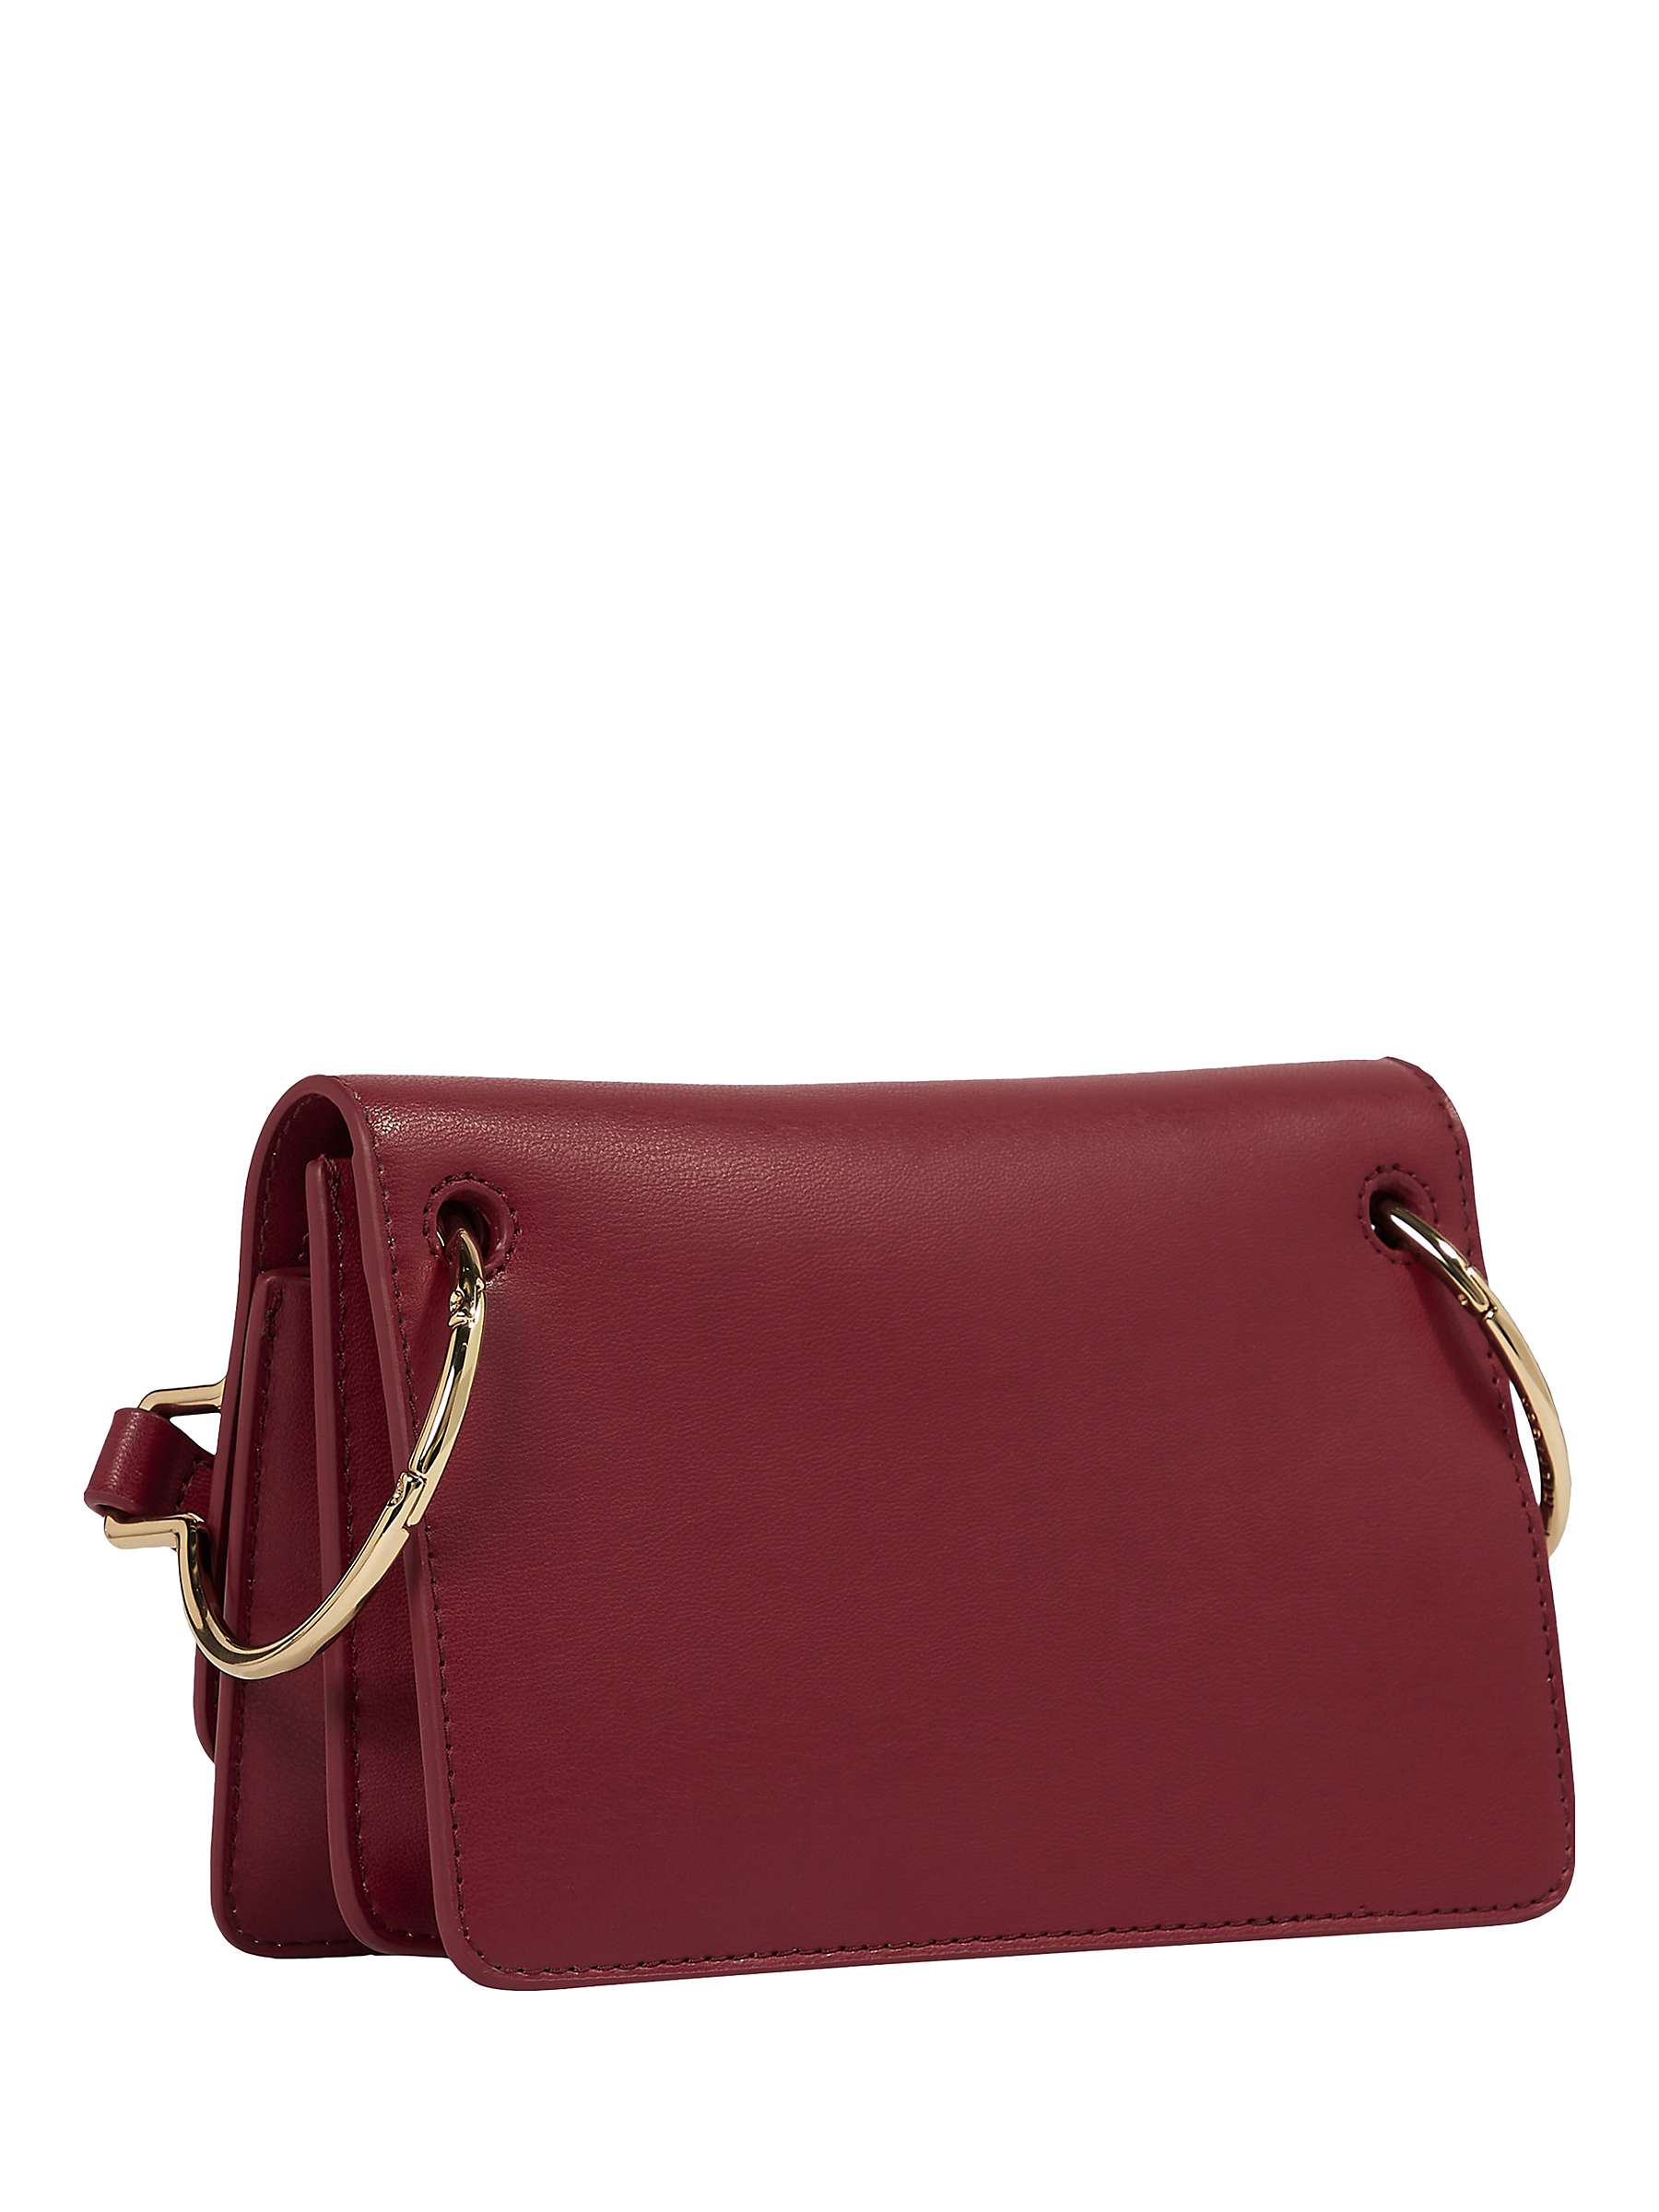 Tommy Hilfiger Chic Cross Body Bag, Rouge at John Lewis & Partners